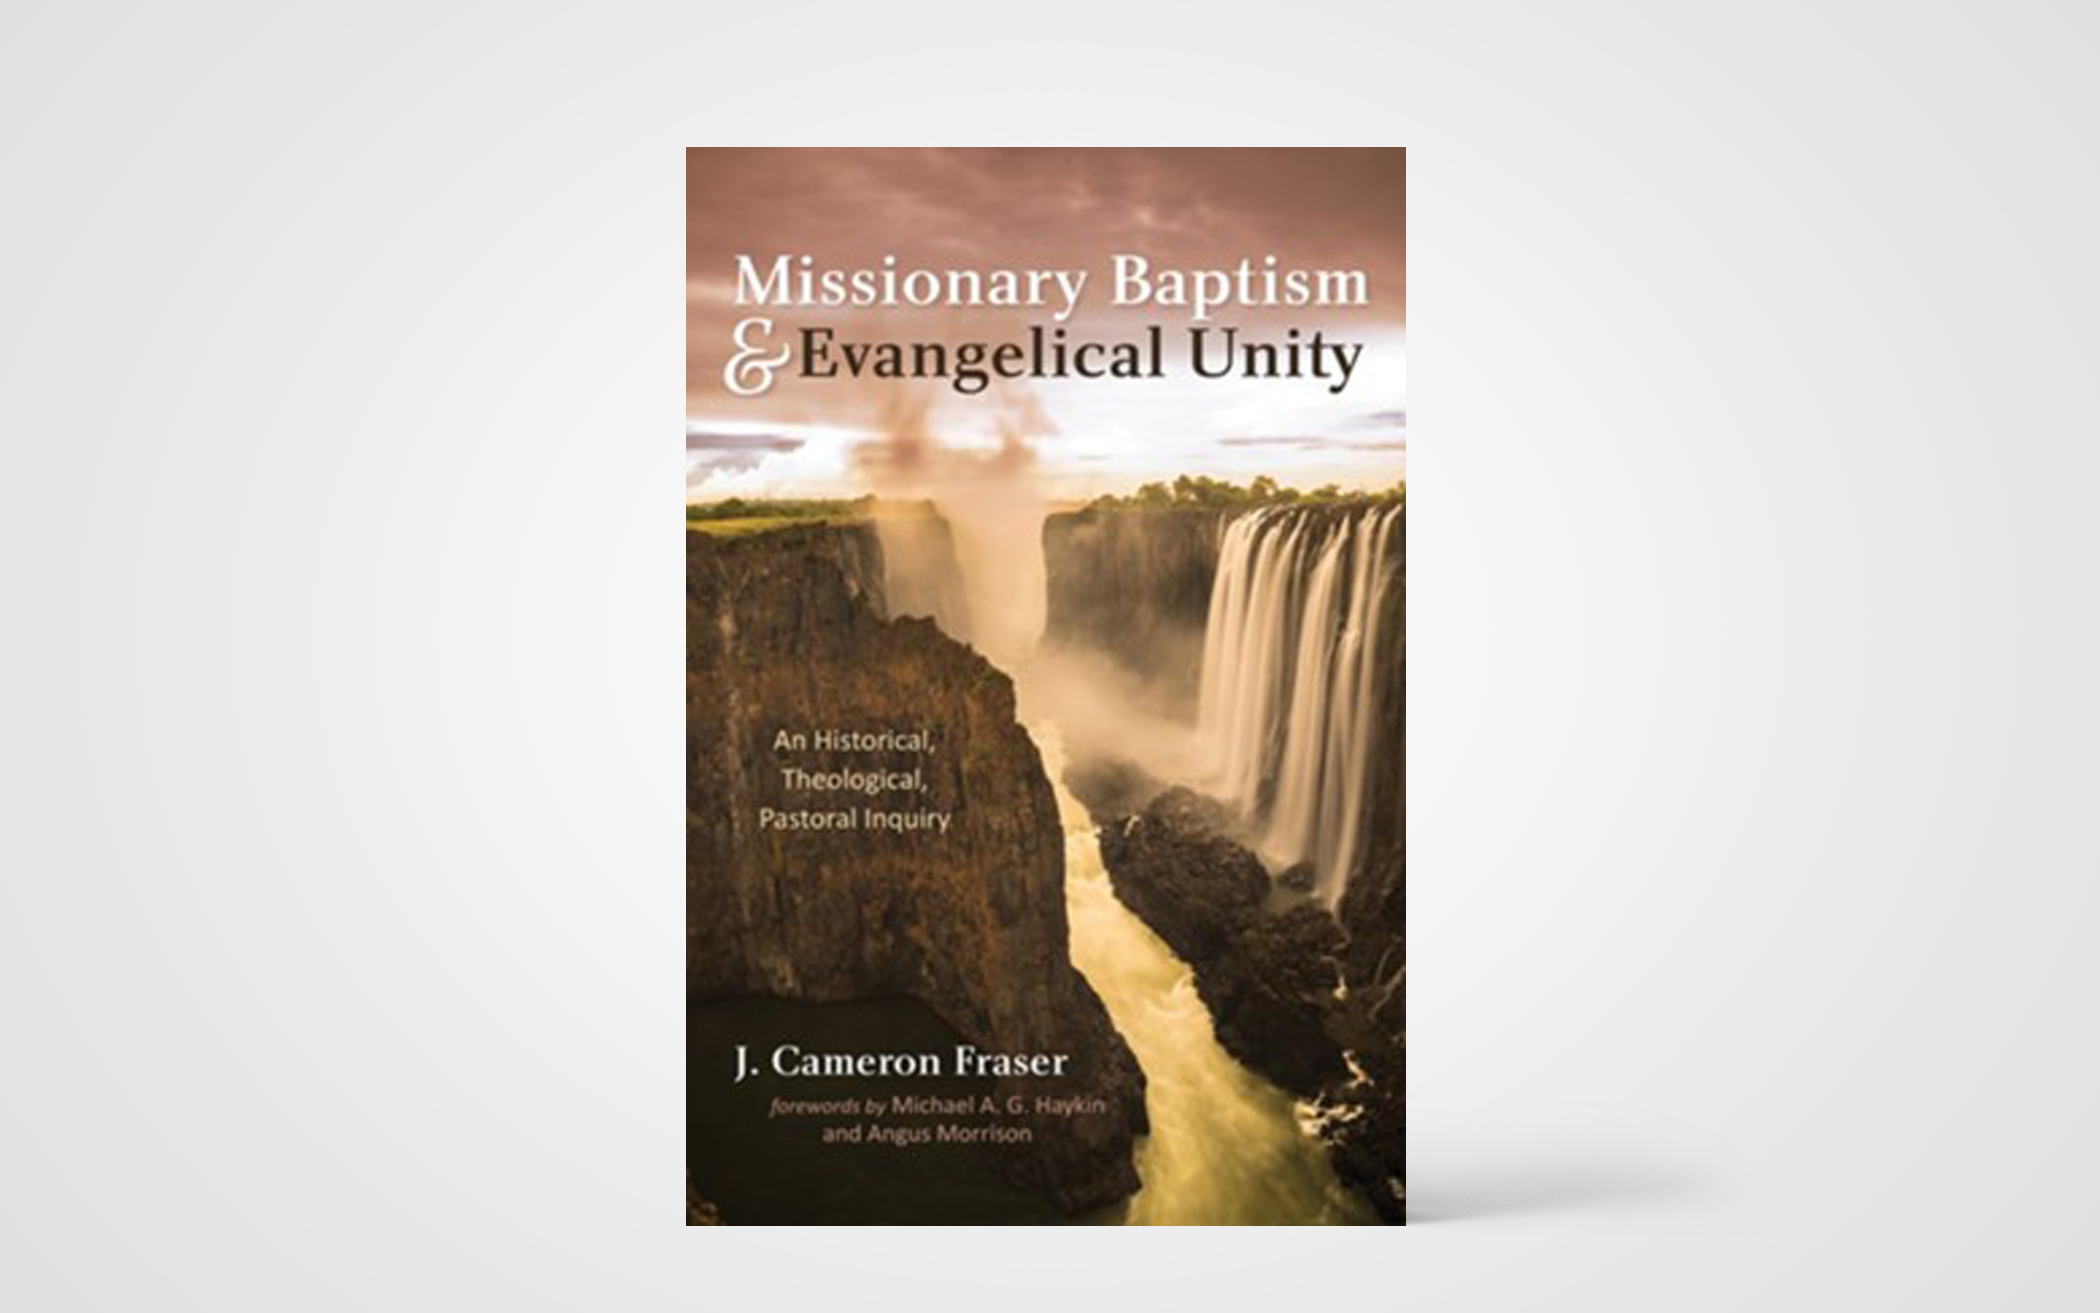 Missionary Baptism and Evangelical Unity